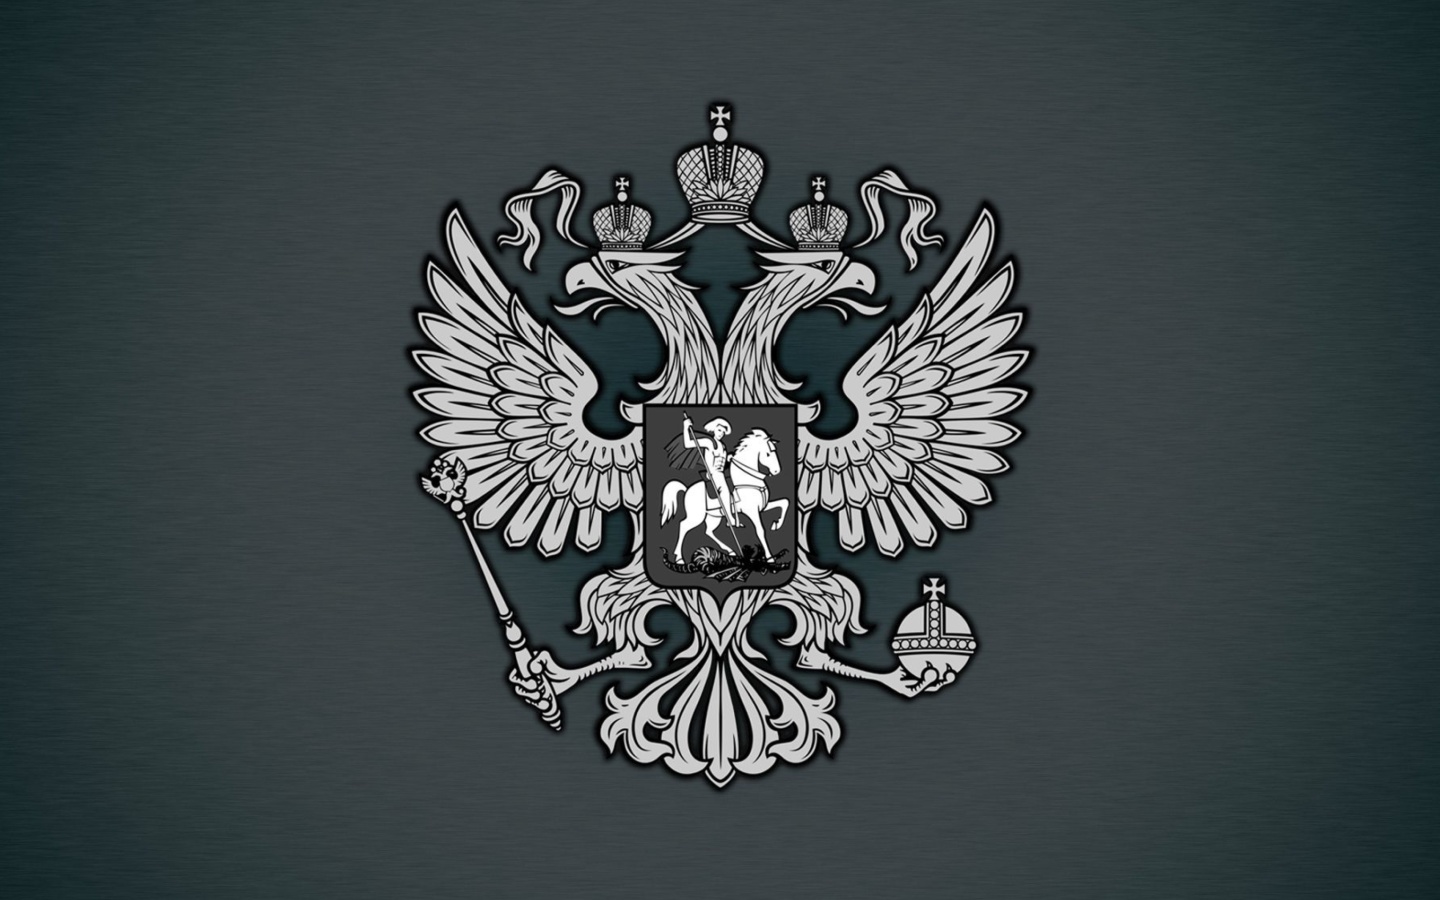 Das Coat of arms of Russia Wallpaper 1440x900